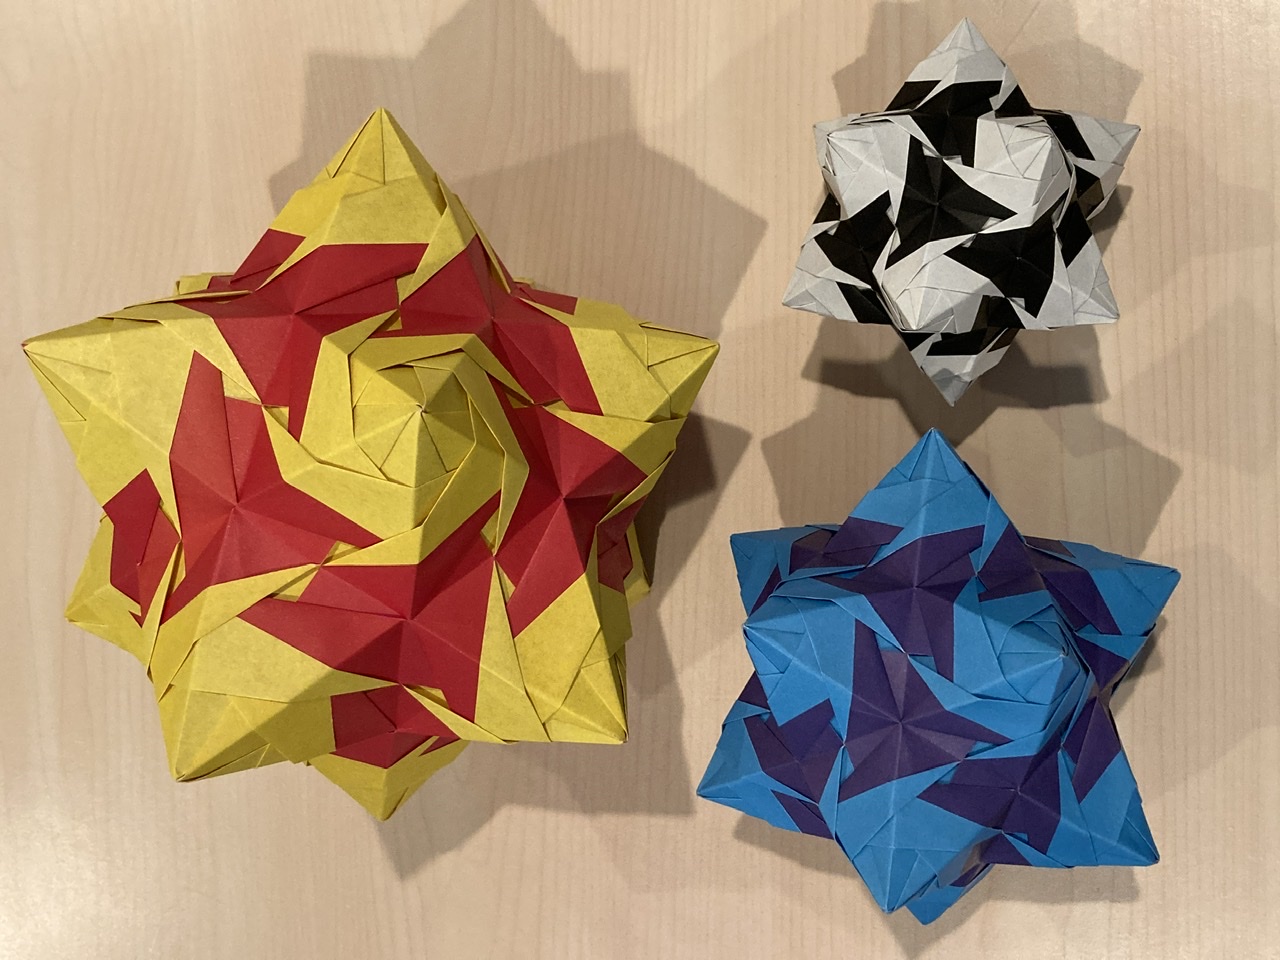 2022/05/30(Mon) 04:58「Stellated Dodecahedron」Janet Yelle
（創作者 Author：Tomoko Fuse,　製作者 Folder：Janet Yelle,　出典 Source：The Complete Book of Origami Polyhedra by Tomoko Fuse）
 Each made from thirty basic rose unit A